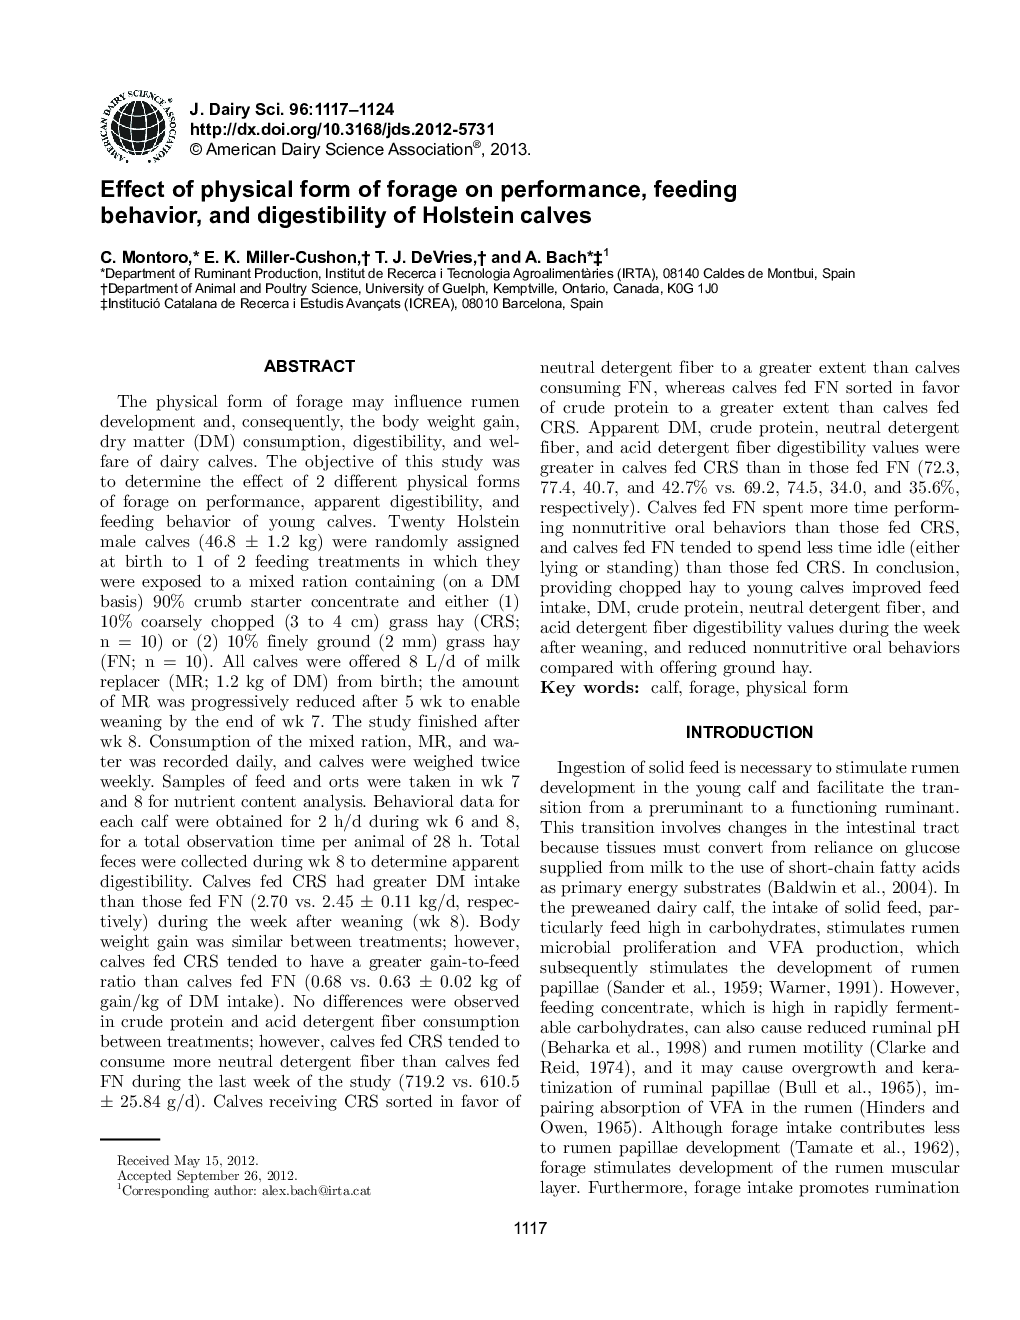 Effect of physical form of forage on performance, feeding behavior, and digestibility of Holstein calves